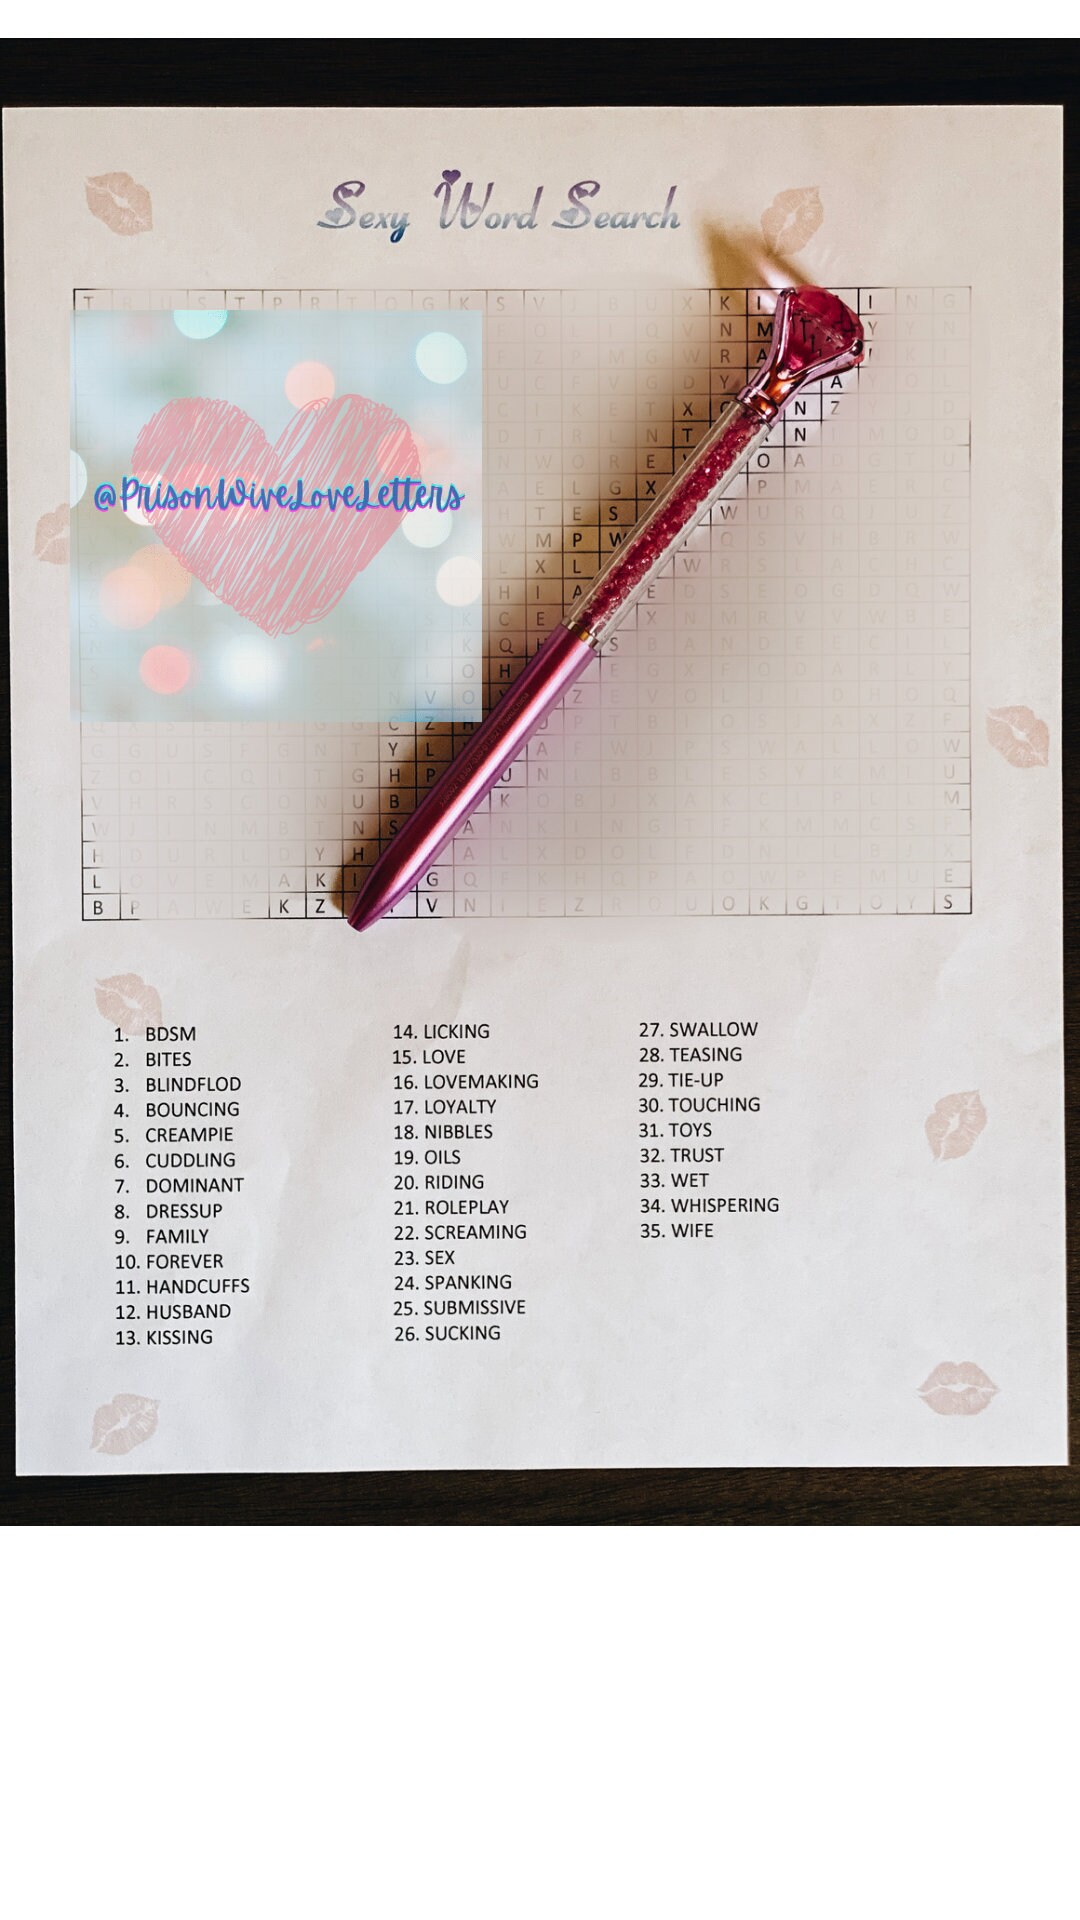 Prison Wife Games Fun Personalized Stationary Love Wife image